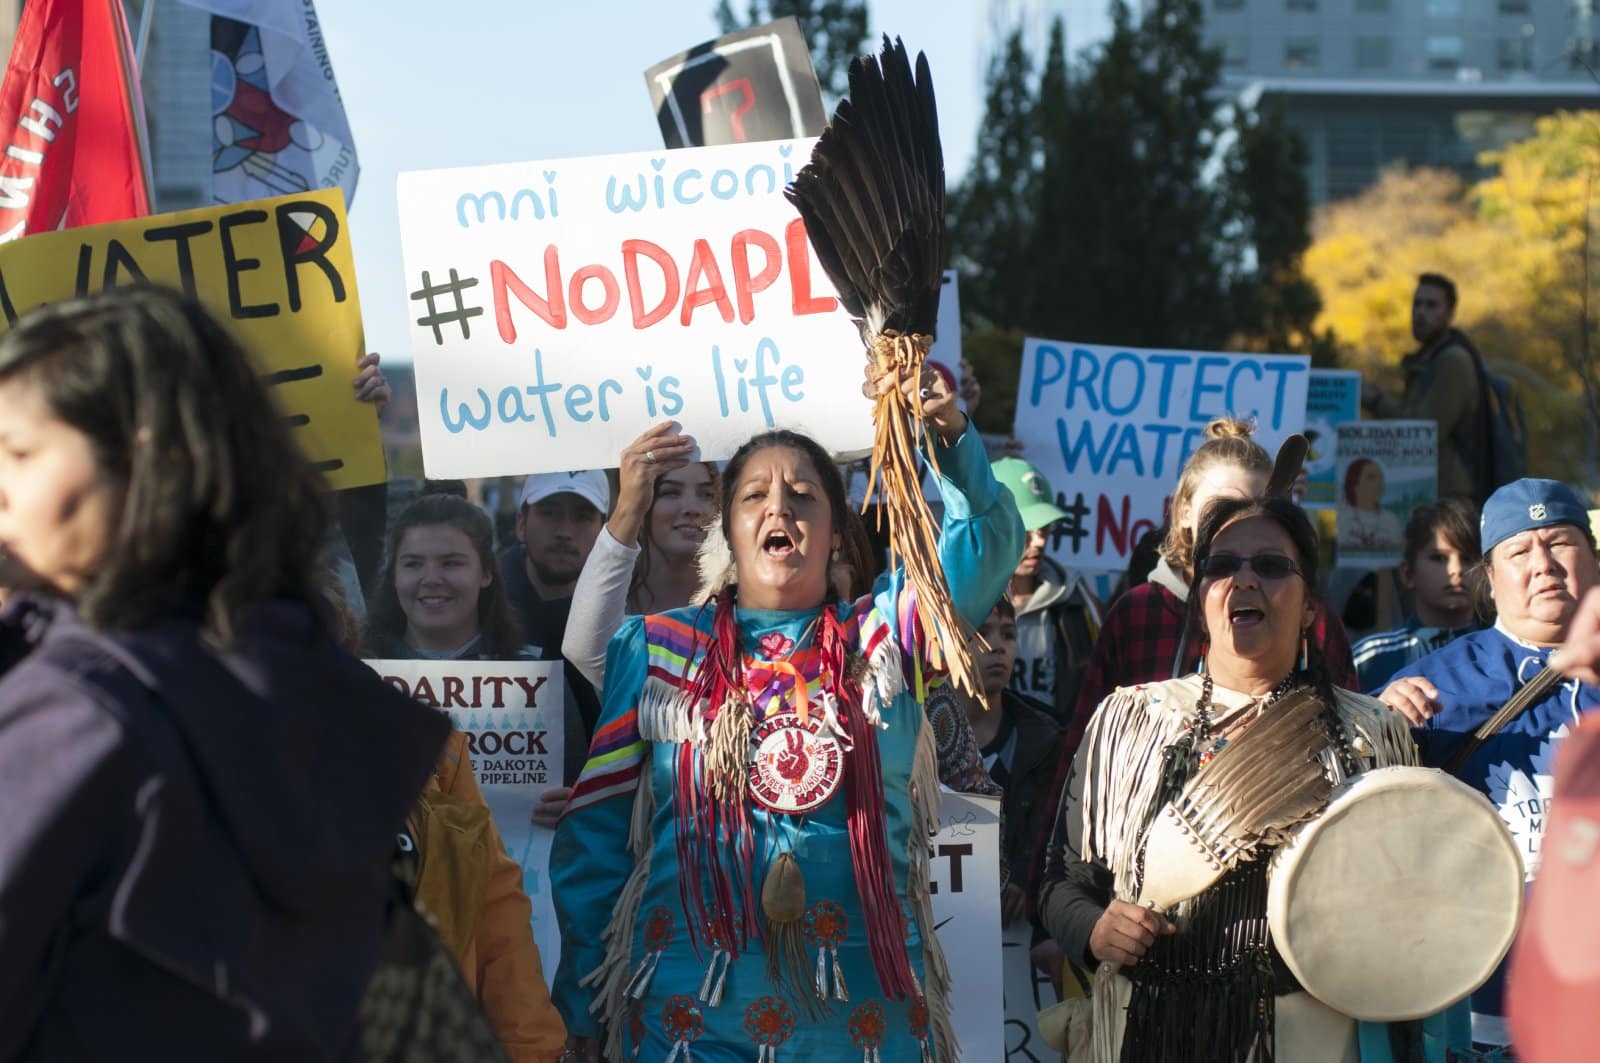 Image Credit: Shutterstock / arindambanerjee <p><span>The Standing Rock Sioux Tribe, along with Indigenous and allied activists, led the protests against the Dakota Access Pipeline, drawing attention to environmental and sovereignty issues facing Native American communities and showcasing their resilience in protecting their land and water.</span></p>